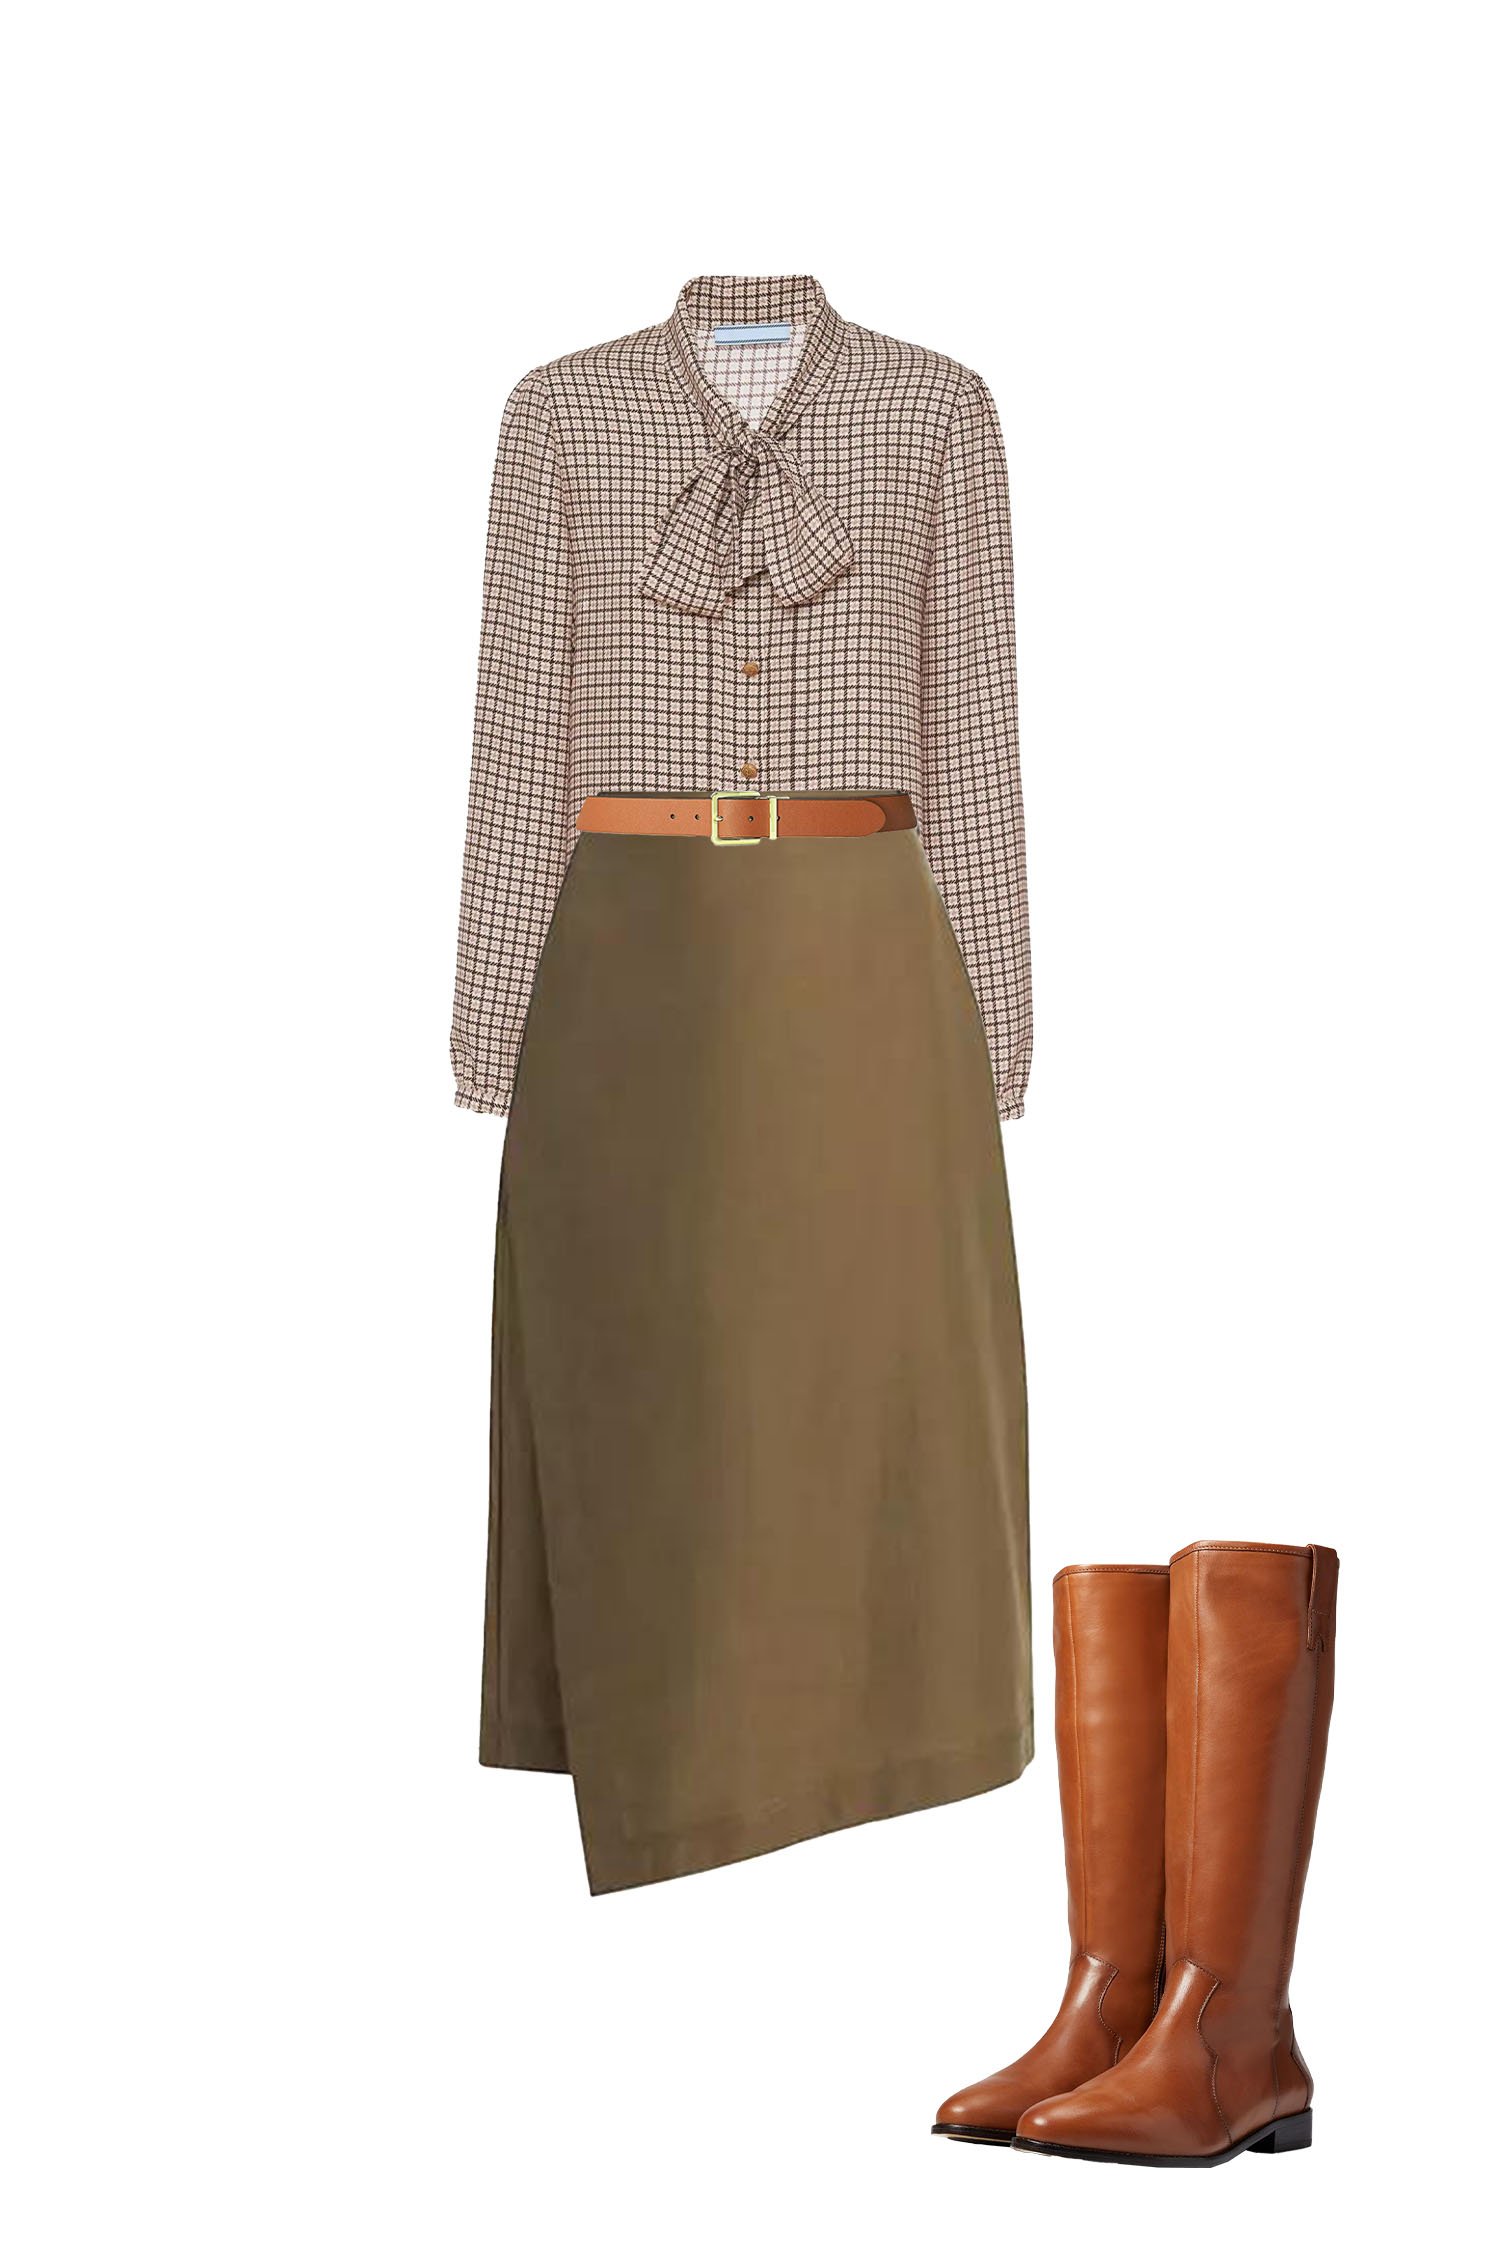 Business Casual Midi-Skirt Outfit - Olive Asymmetric Skirt, Brown Check Pussy-Bow Blouse, Brown Knee-High Flat Boots